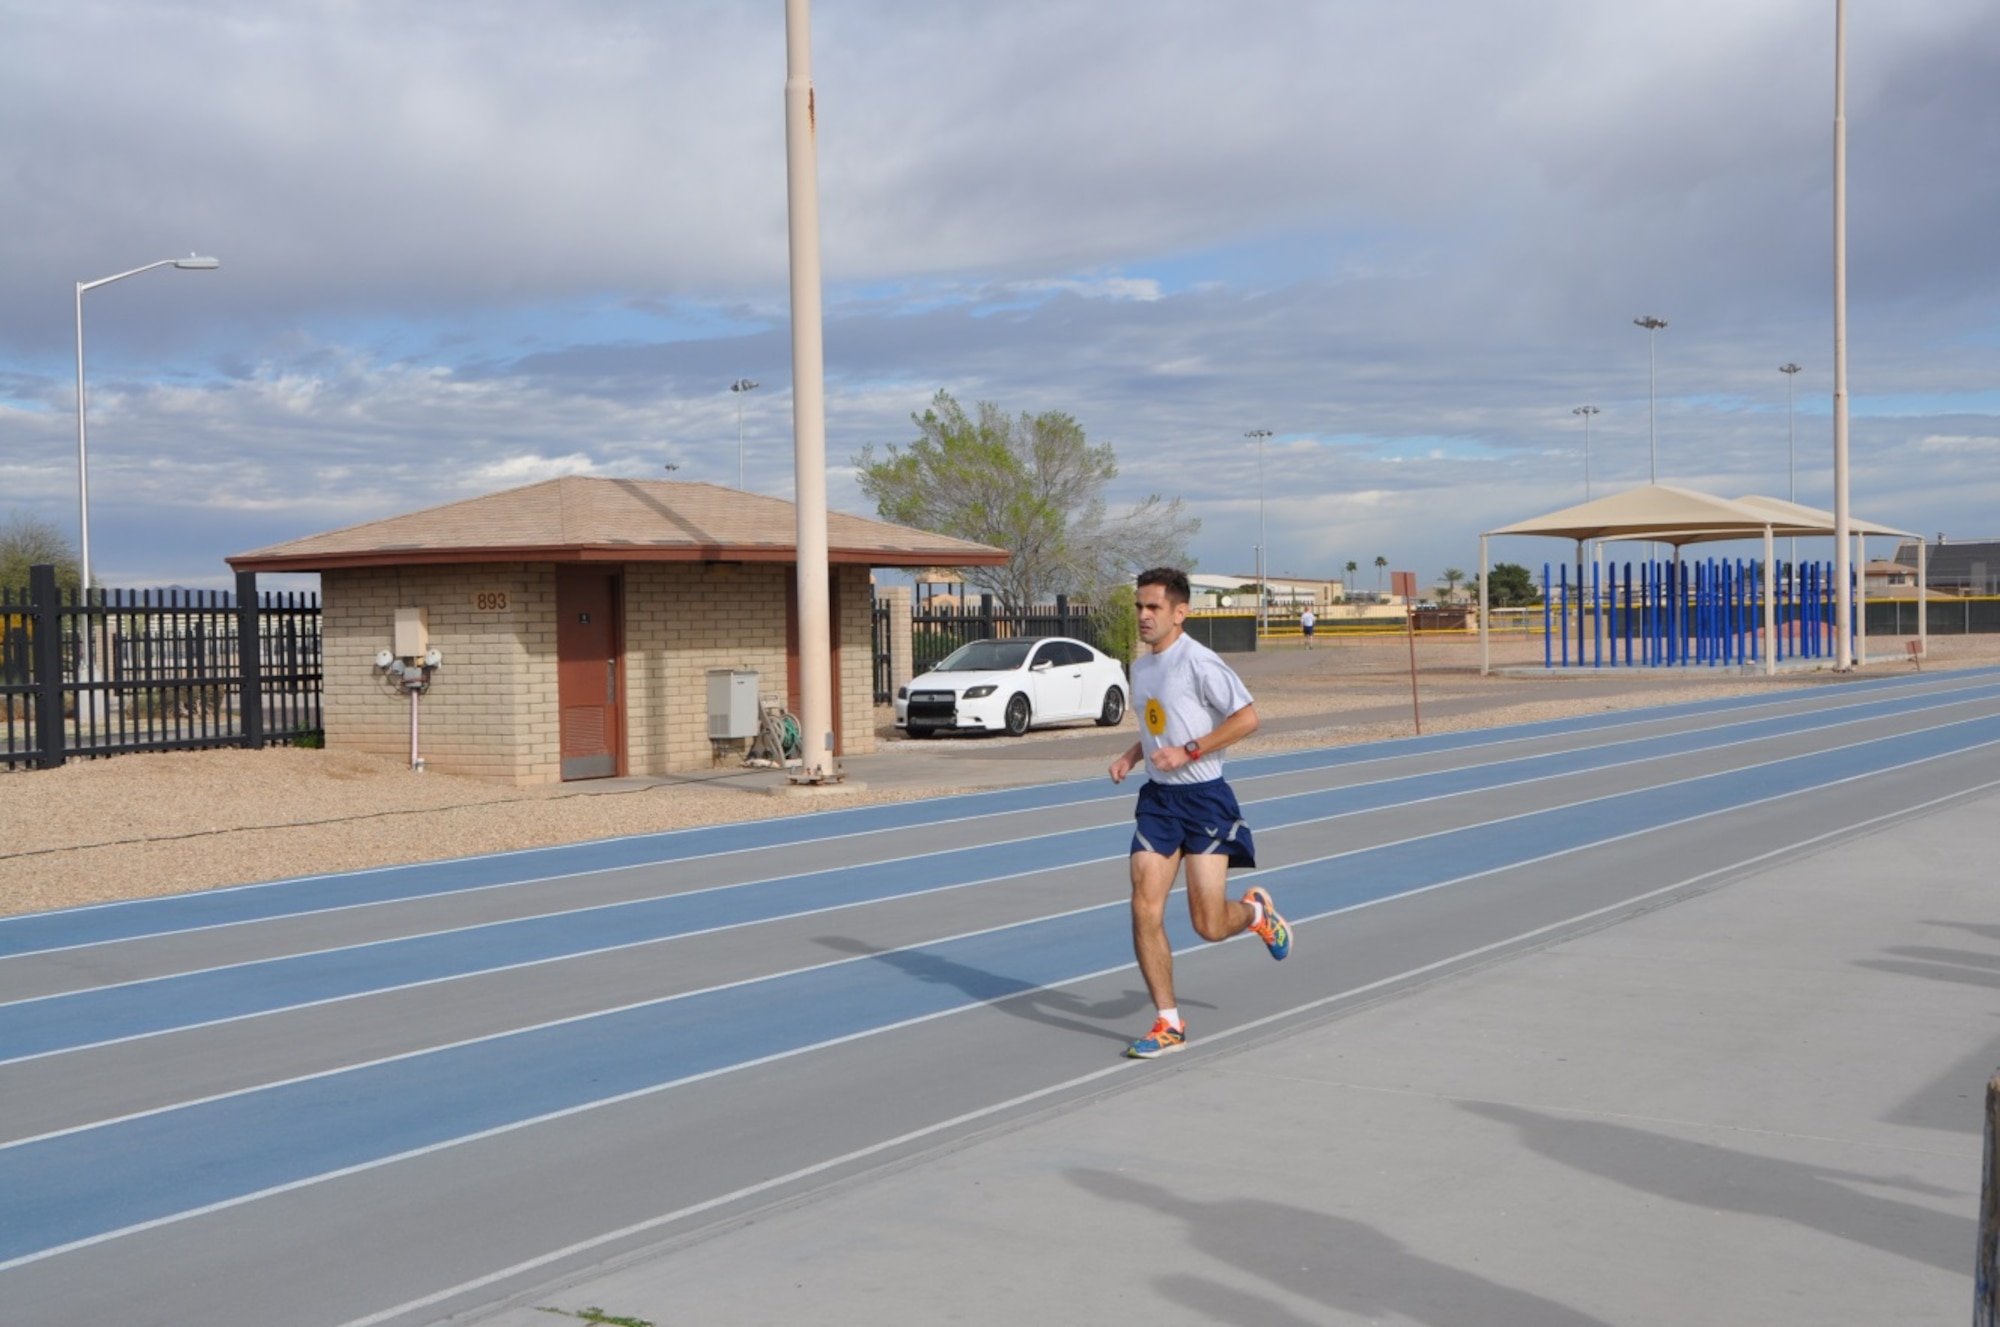 Staff Sgt. Christian Enriquez, 944th Fighter Wing Det. 1 Maintenance, F16 avionics craftsman, ran into the Luke AFB history books today.  Running 1.5 miles in 8:10 secured his success of beating the current record of 8:24 which was set at Luke on June 25, 2014. Originally from Chicago Ill., Enriquez began running 13 years ago as a freshman in high school and said it has always been something that he is good at. (U.S. Air Force Photo by Tech. Sgt. Barbara Plante)
